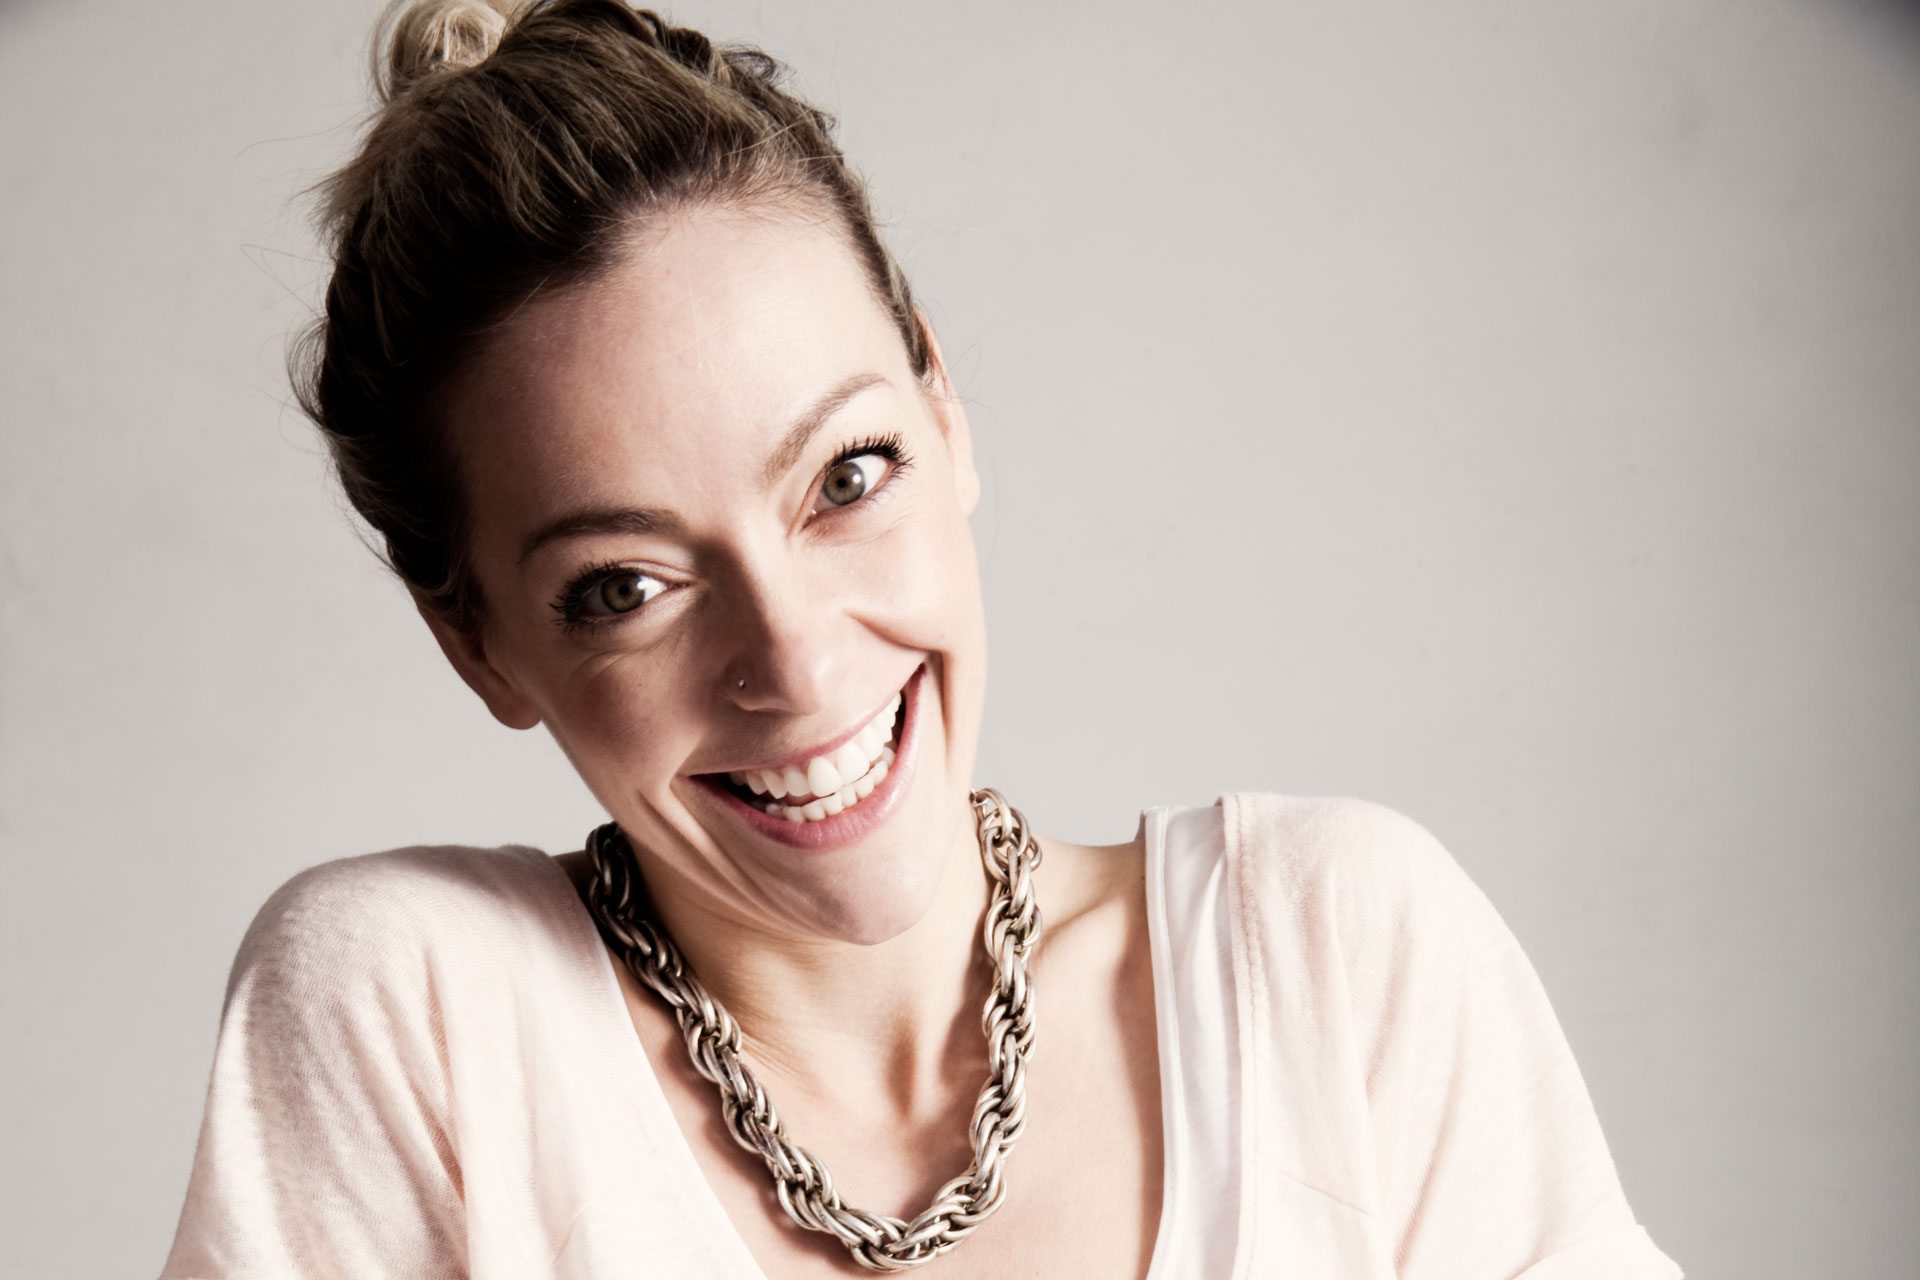 Cherry Healey Interview At Home With The Bbc Documentary Maker